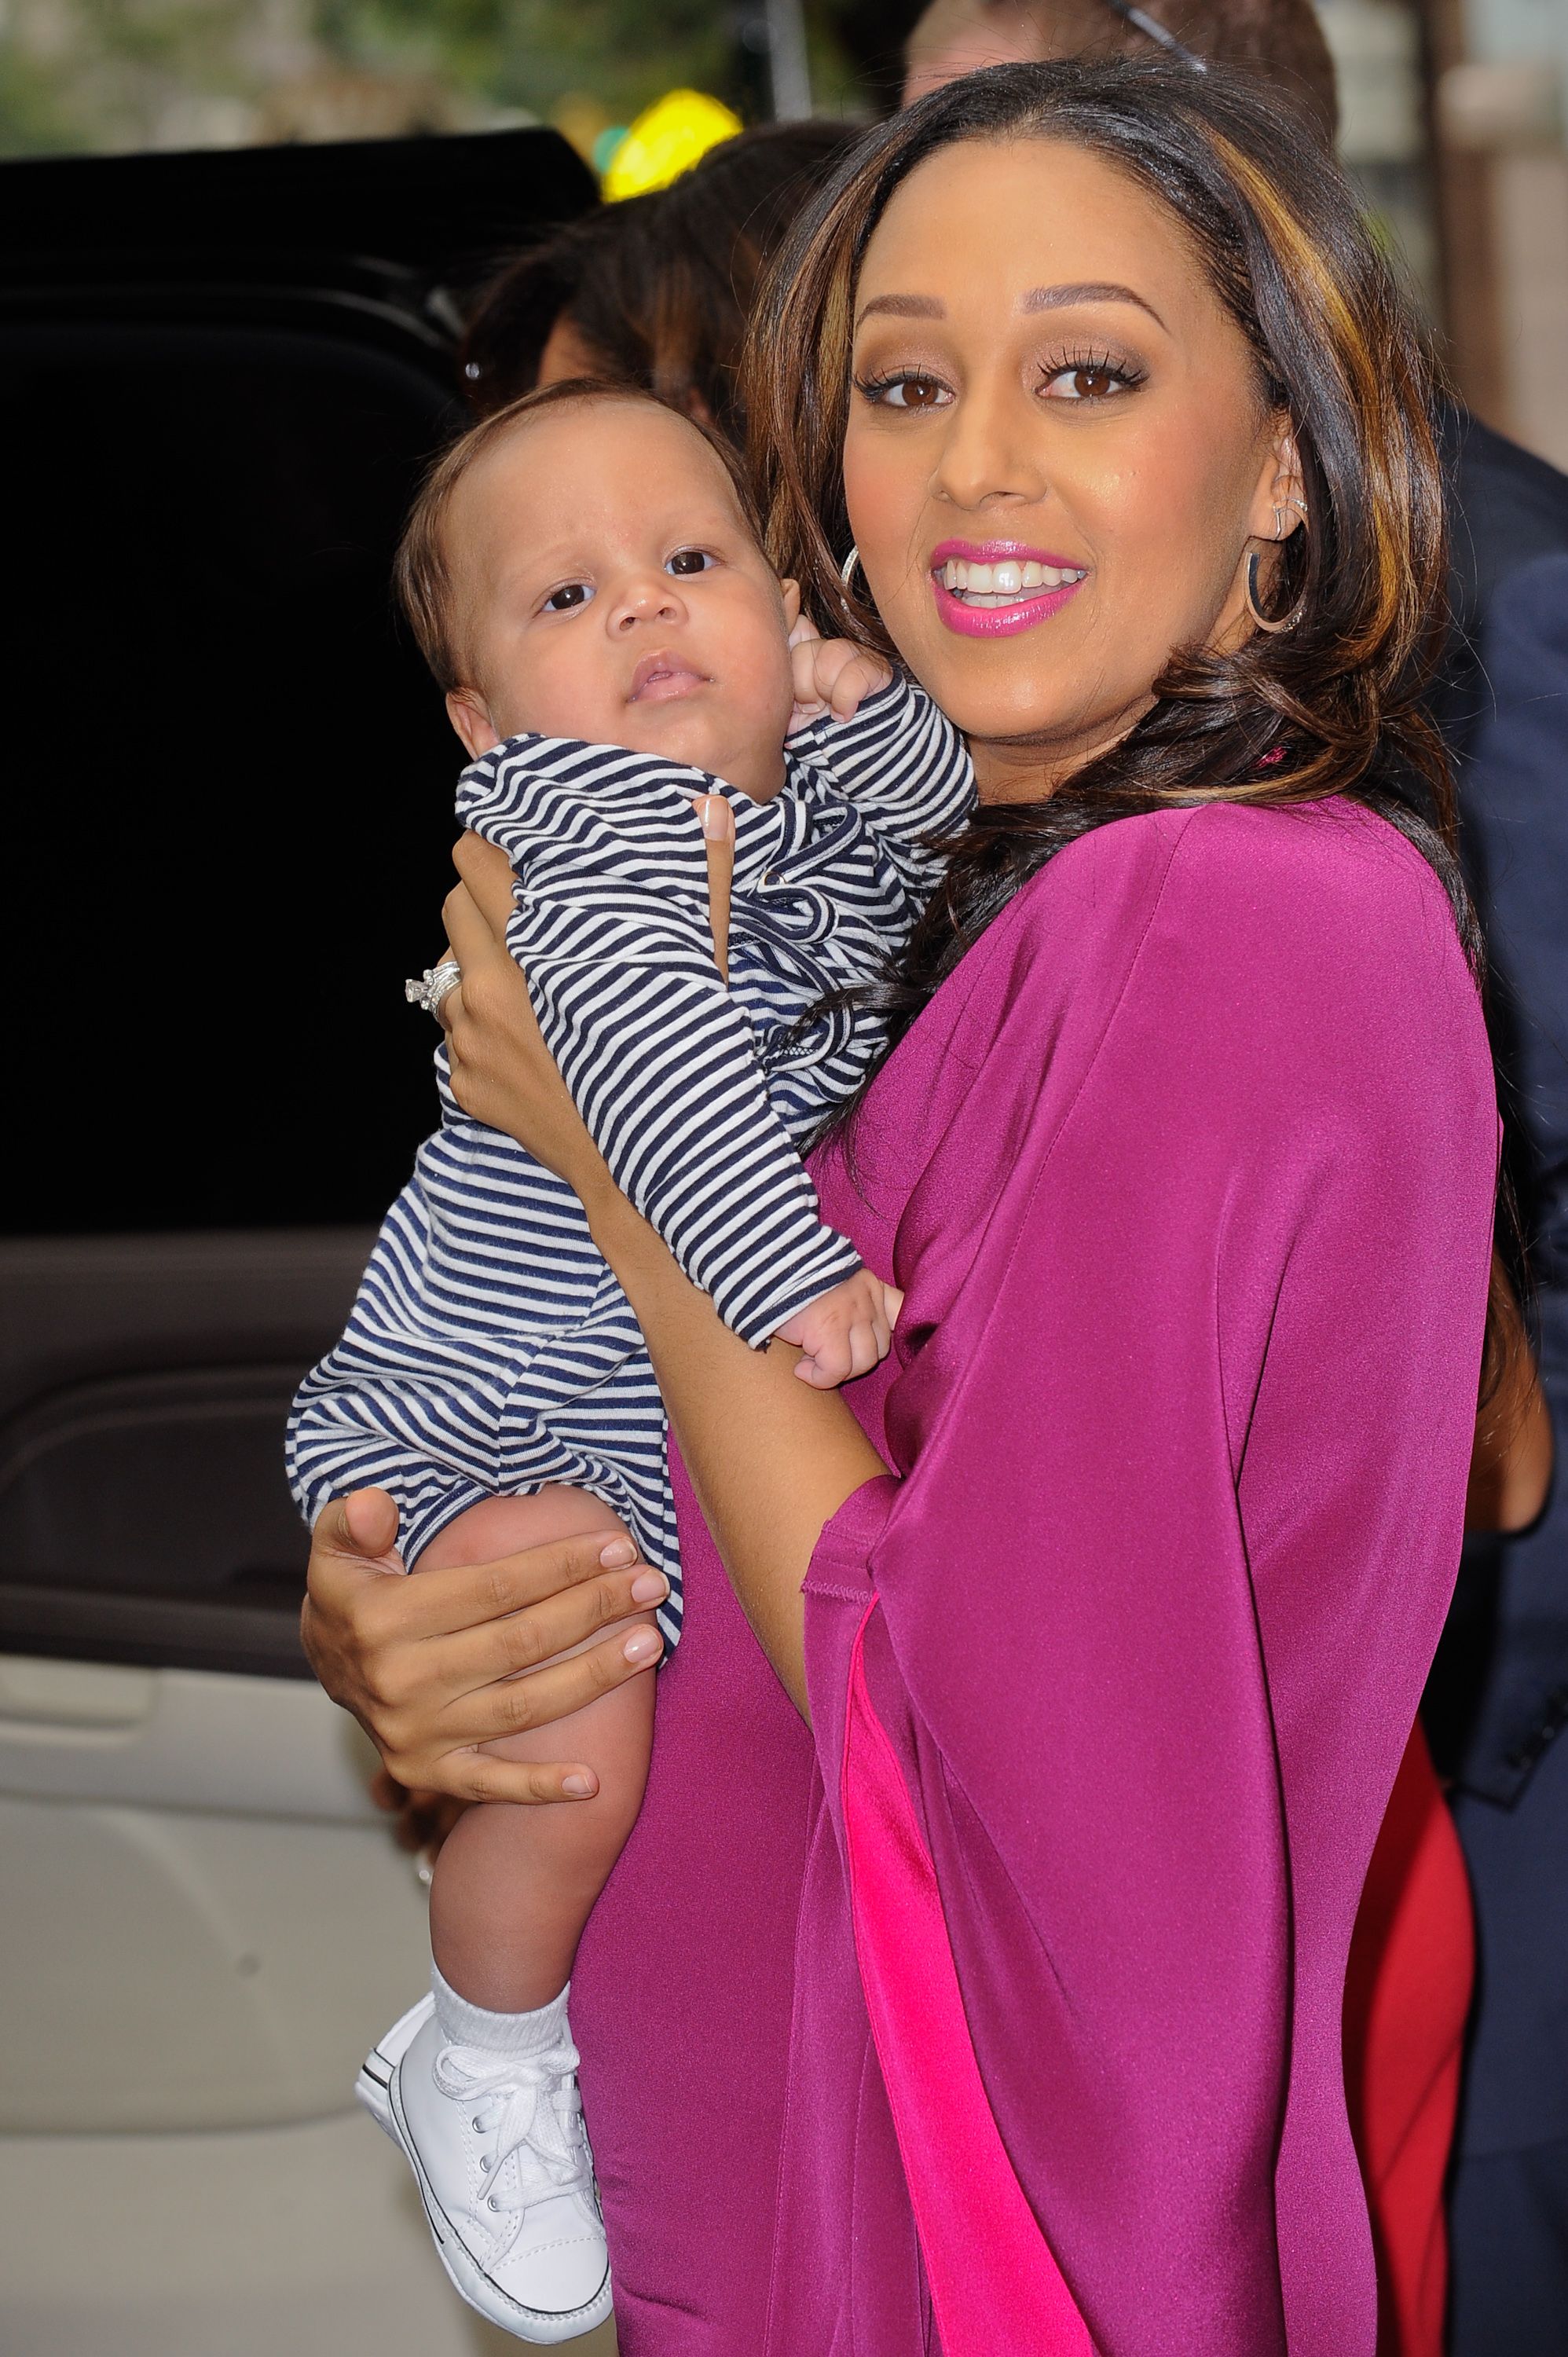 Tia Mowry and her son Cree Hardrict leave the "Wendy Williams Show" taping at the AMV Studios on September 27, 2011 in New York City. | Source: Getty Images